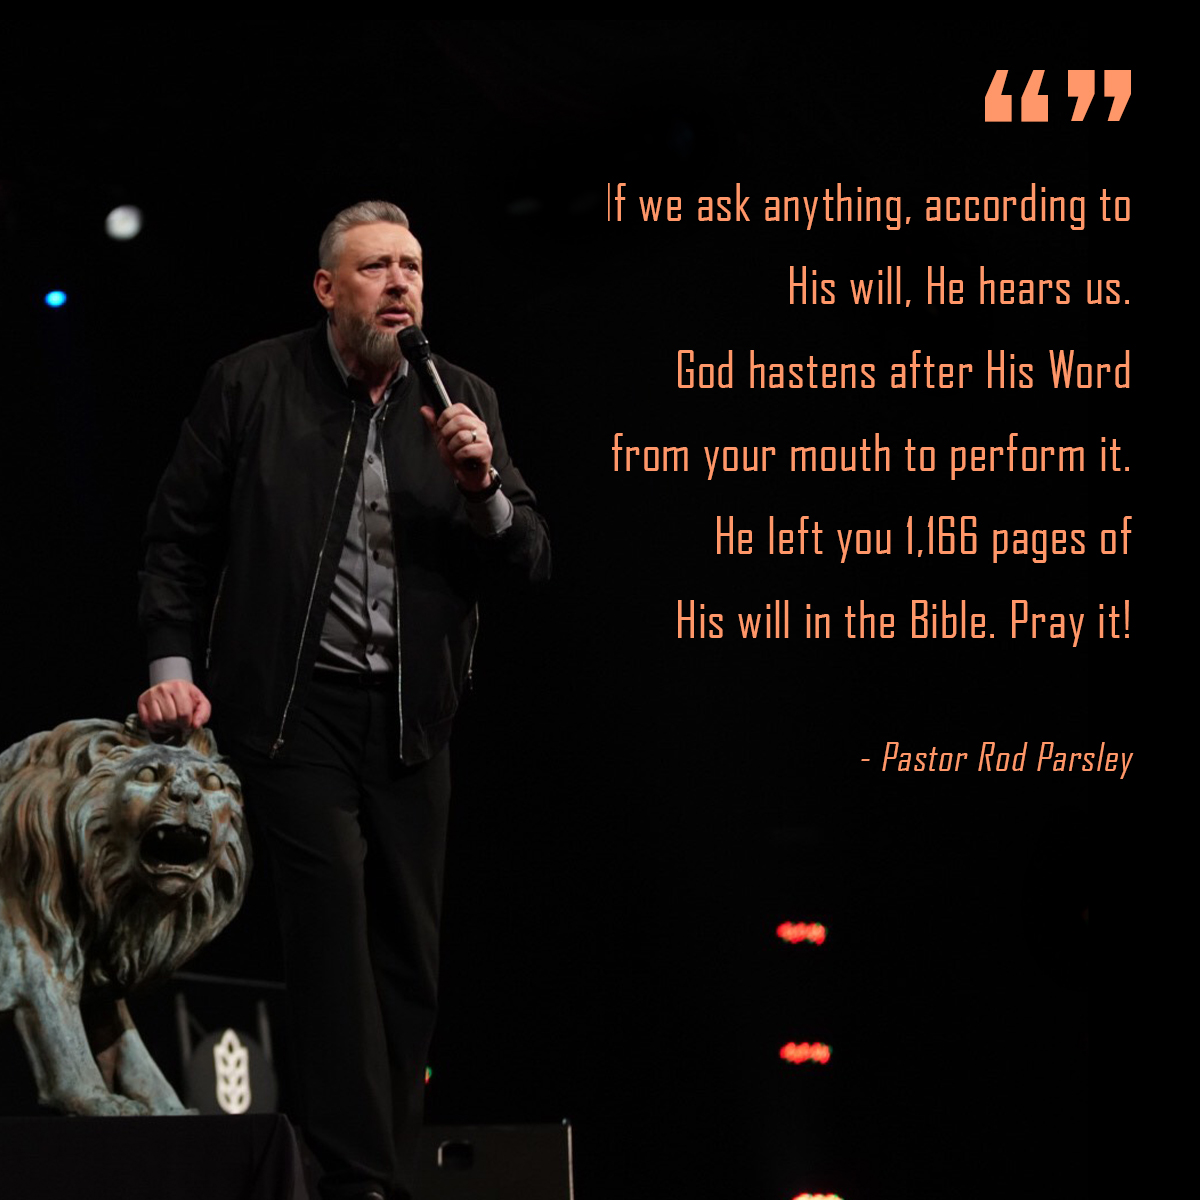 “If we ask anything, according to His will, He hears us. God hastens after His Word from your mouth to perform it. He left you 1,166 pages of His will in the Bible. Pray it!” – Pastor Rod Parsley